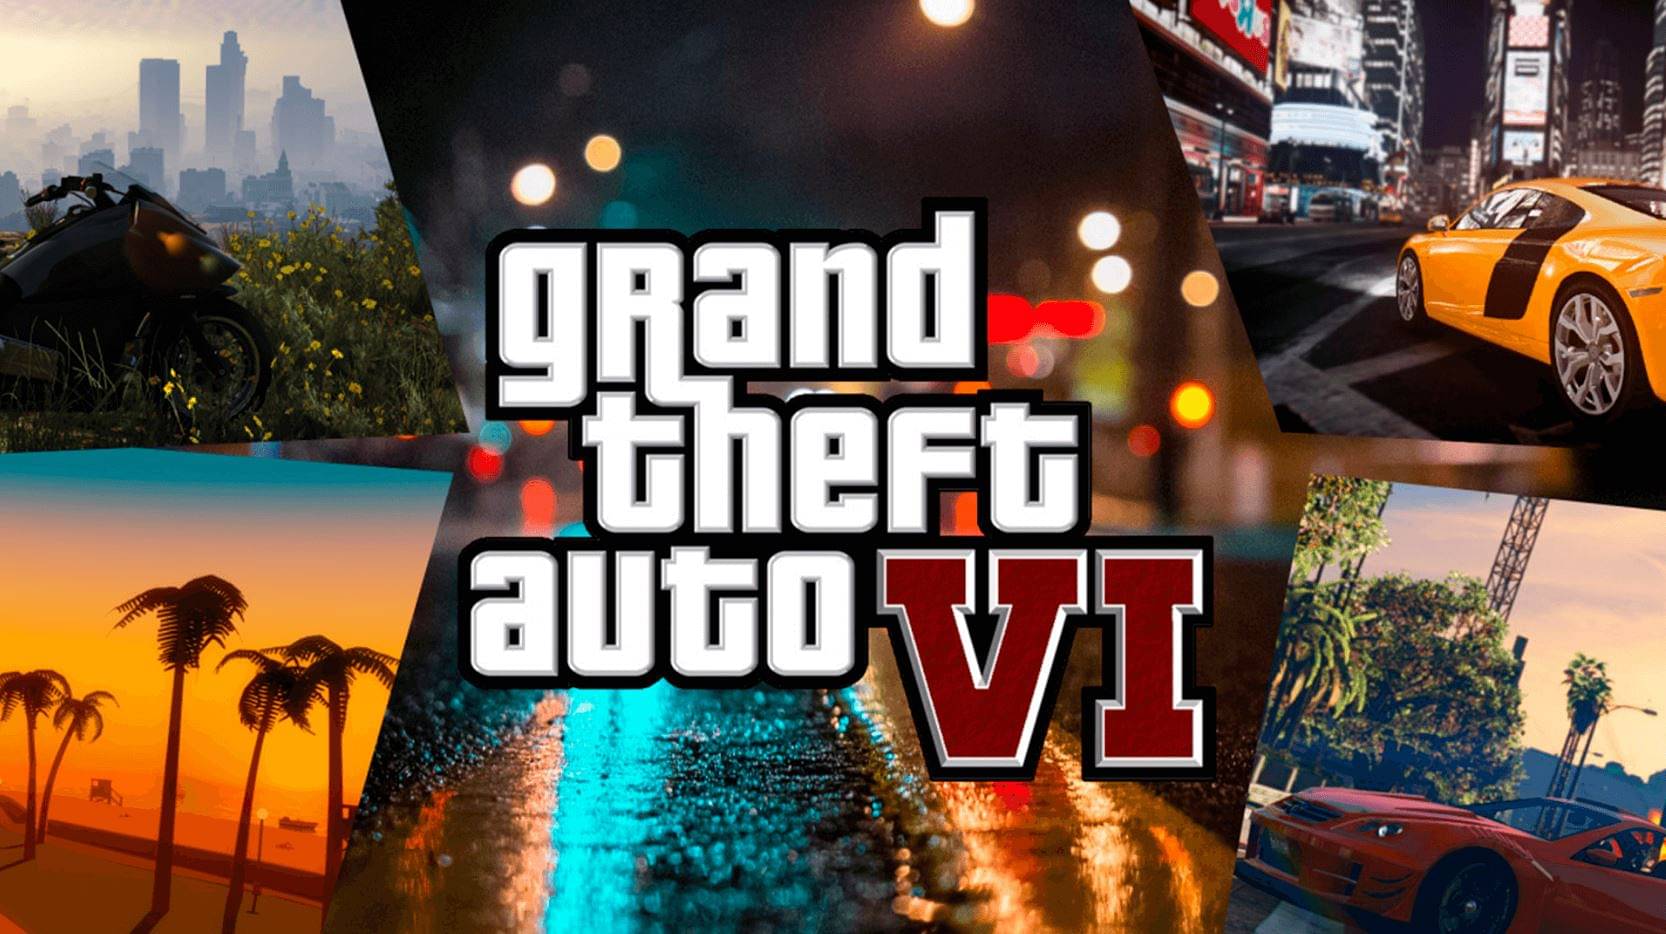 An illustration of Grand Theft Auto 6 cover image